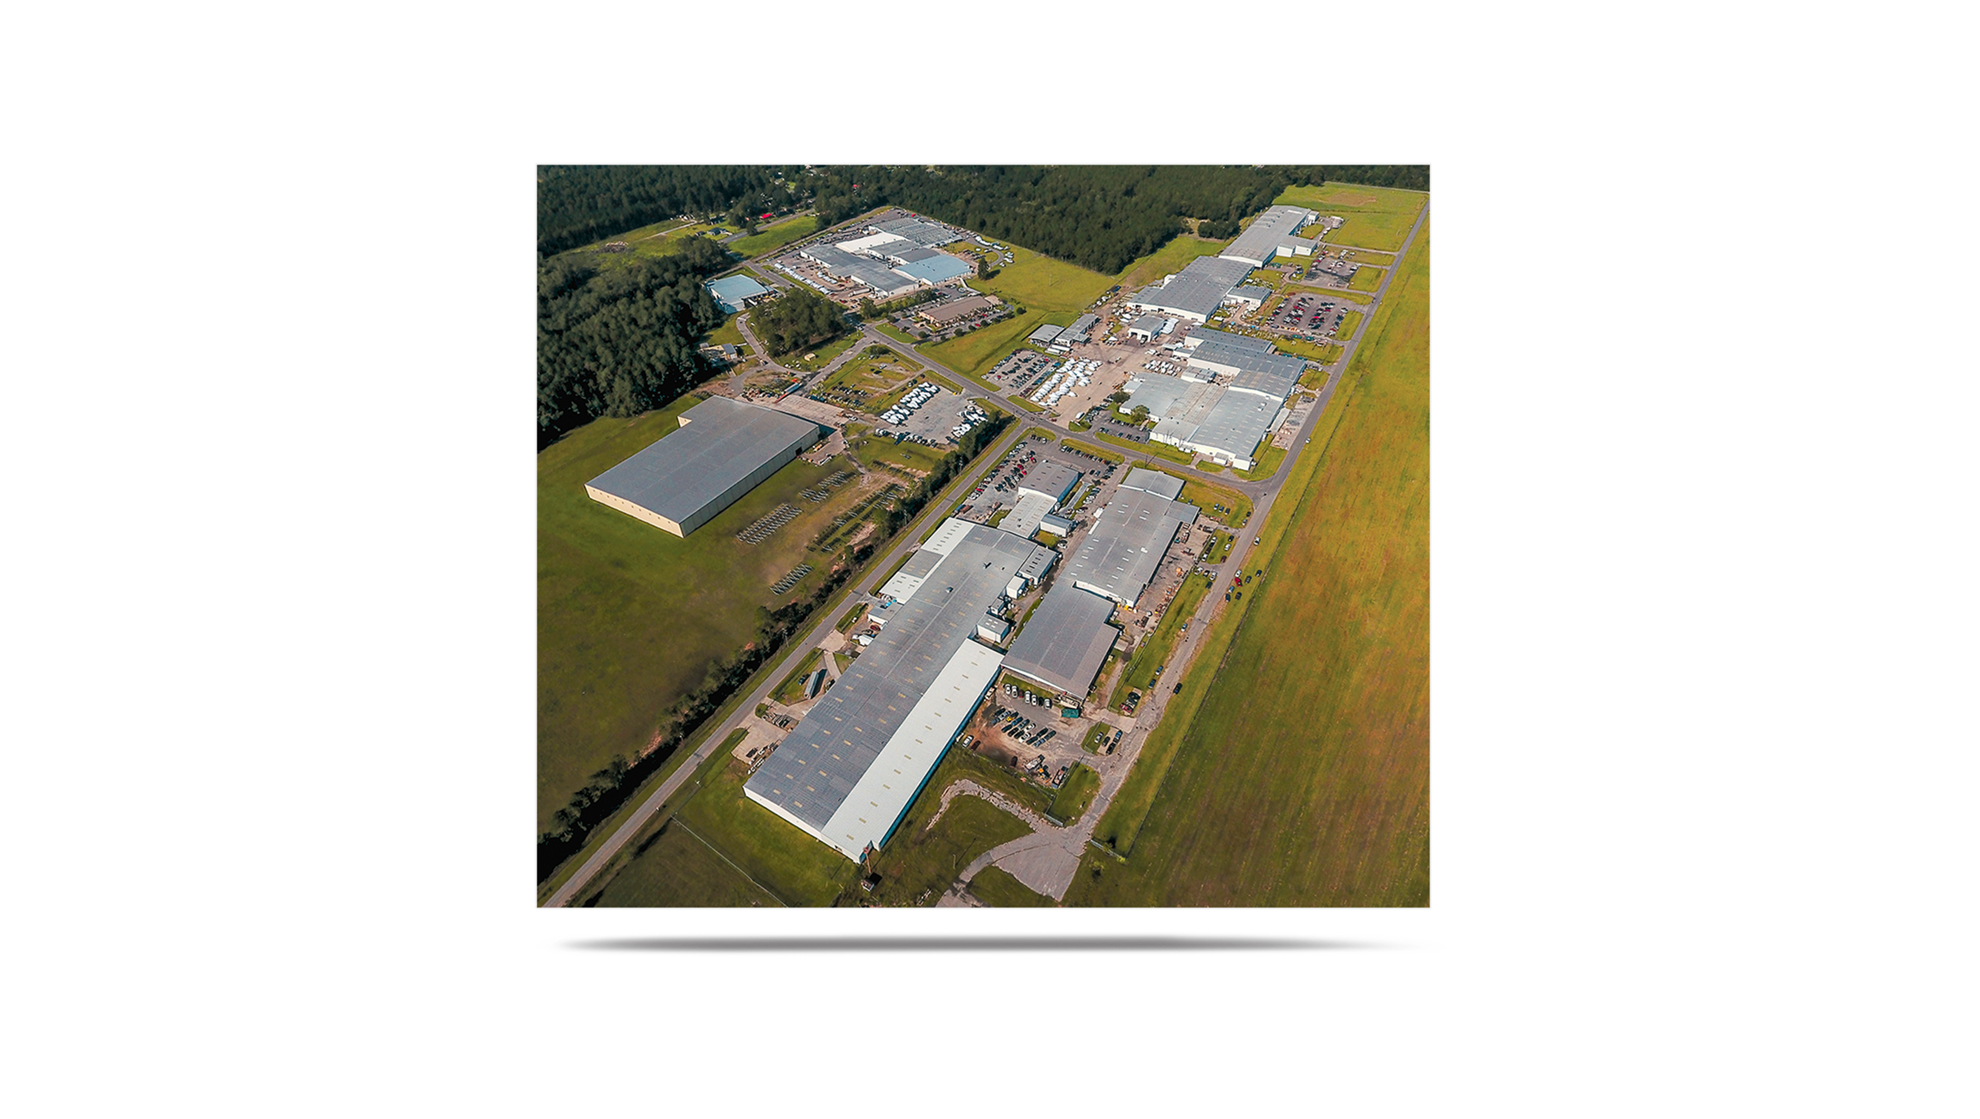 Overview of Production Plant